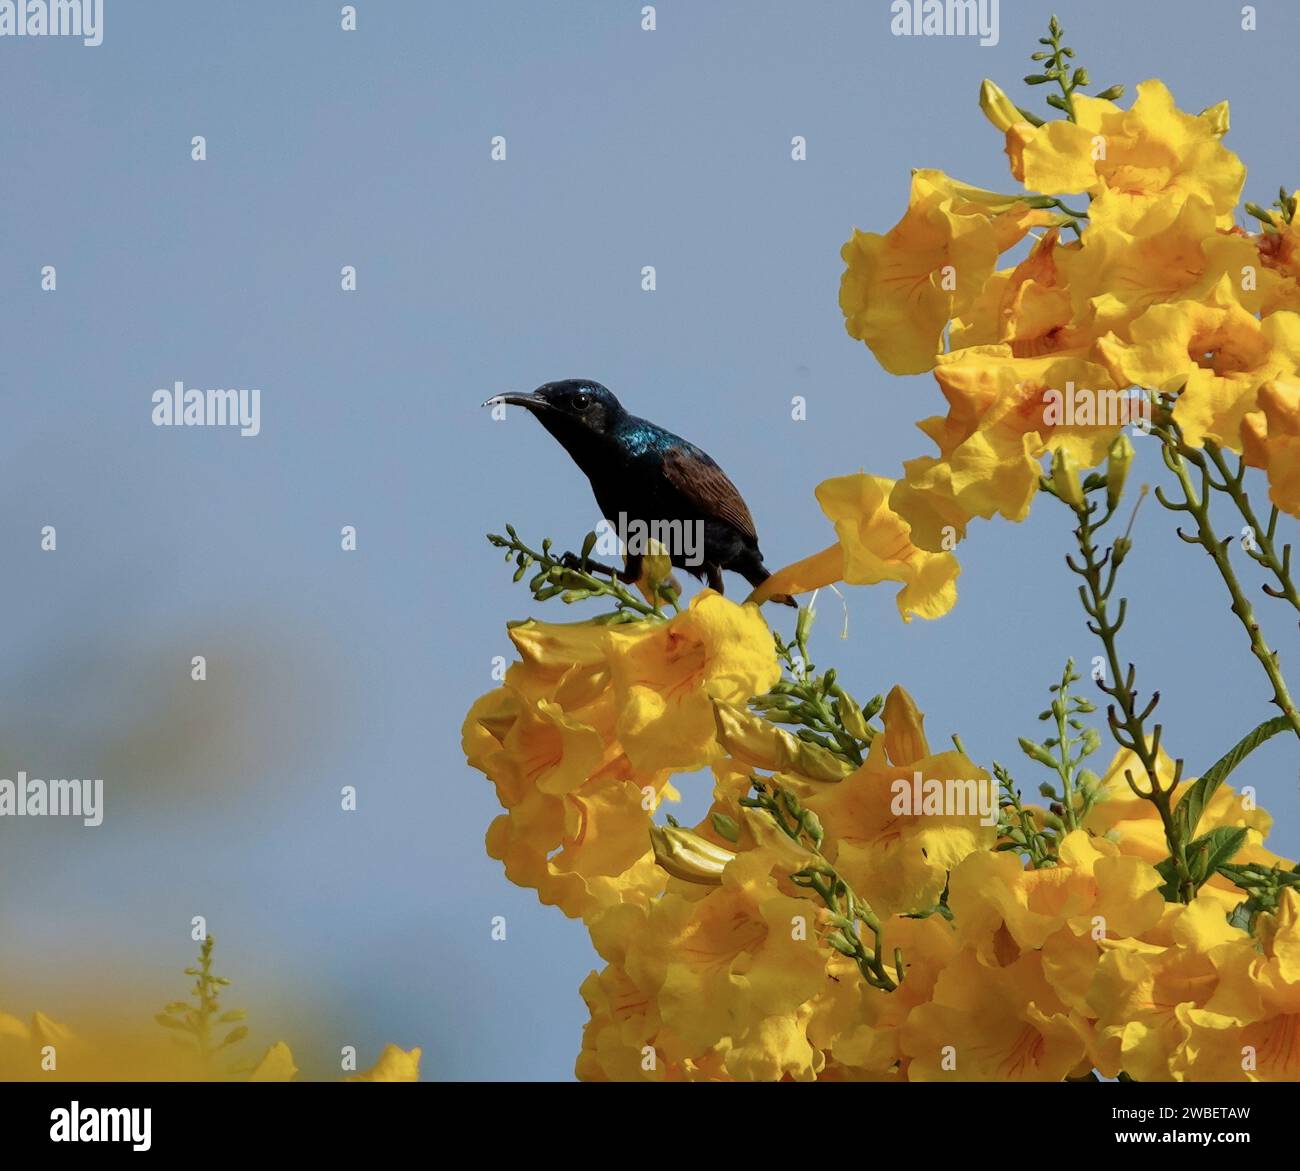 A beautiful Palestine sunbird perched atop a branch with yellow flowers Stock Photo